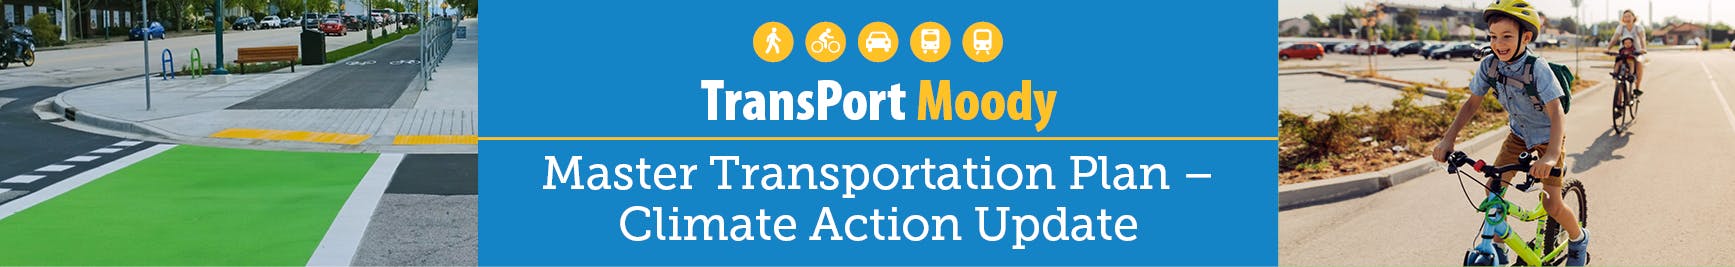 TransPort Moody: Climate Action Update